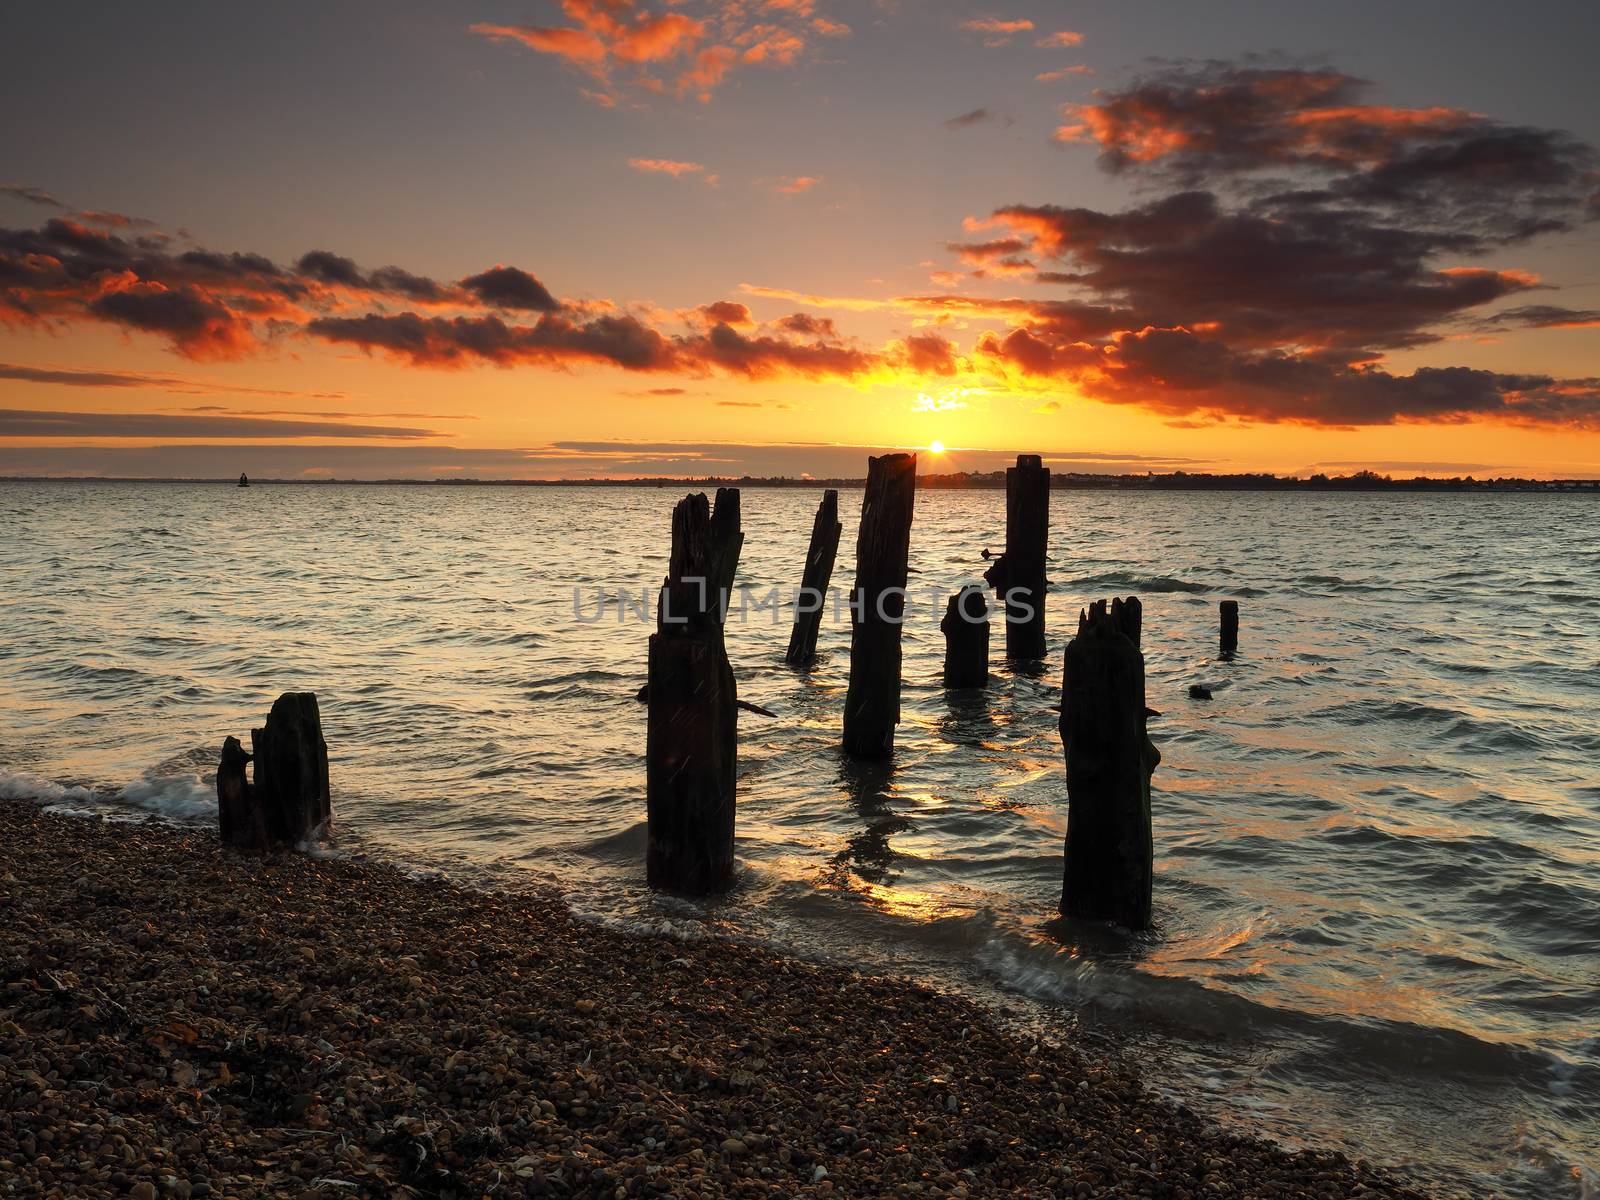 Remains of old wooden jetty looking to Harwich with stunning sunset, Felixstowe by PhilHarland